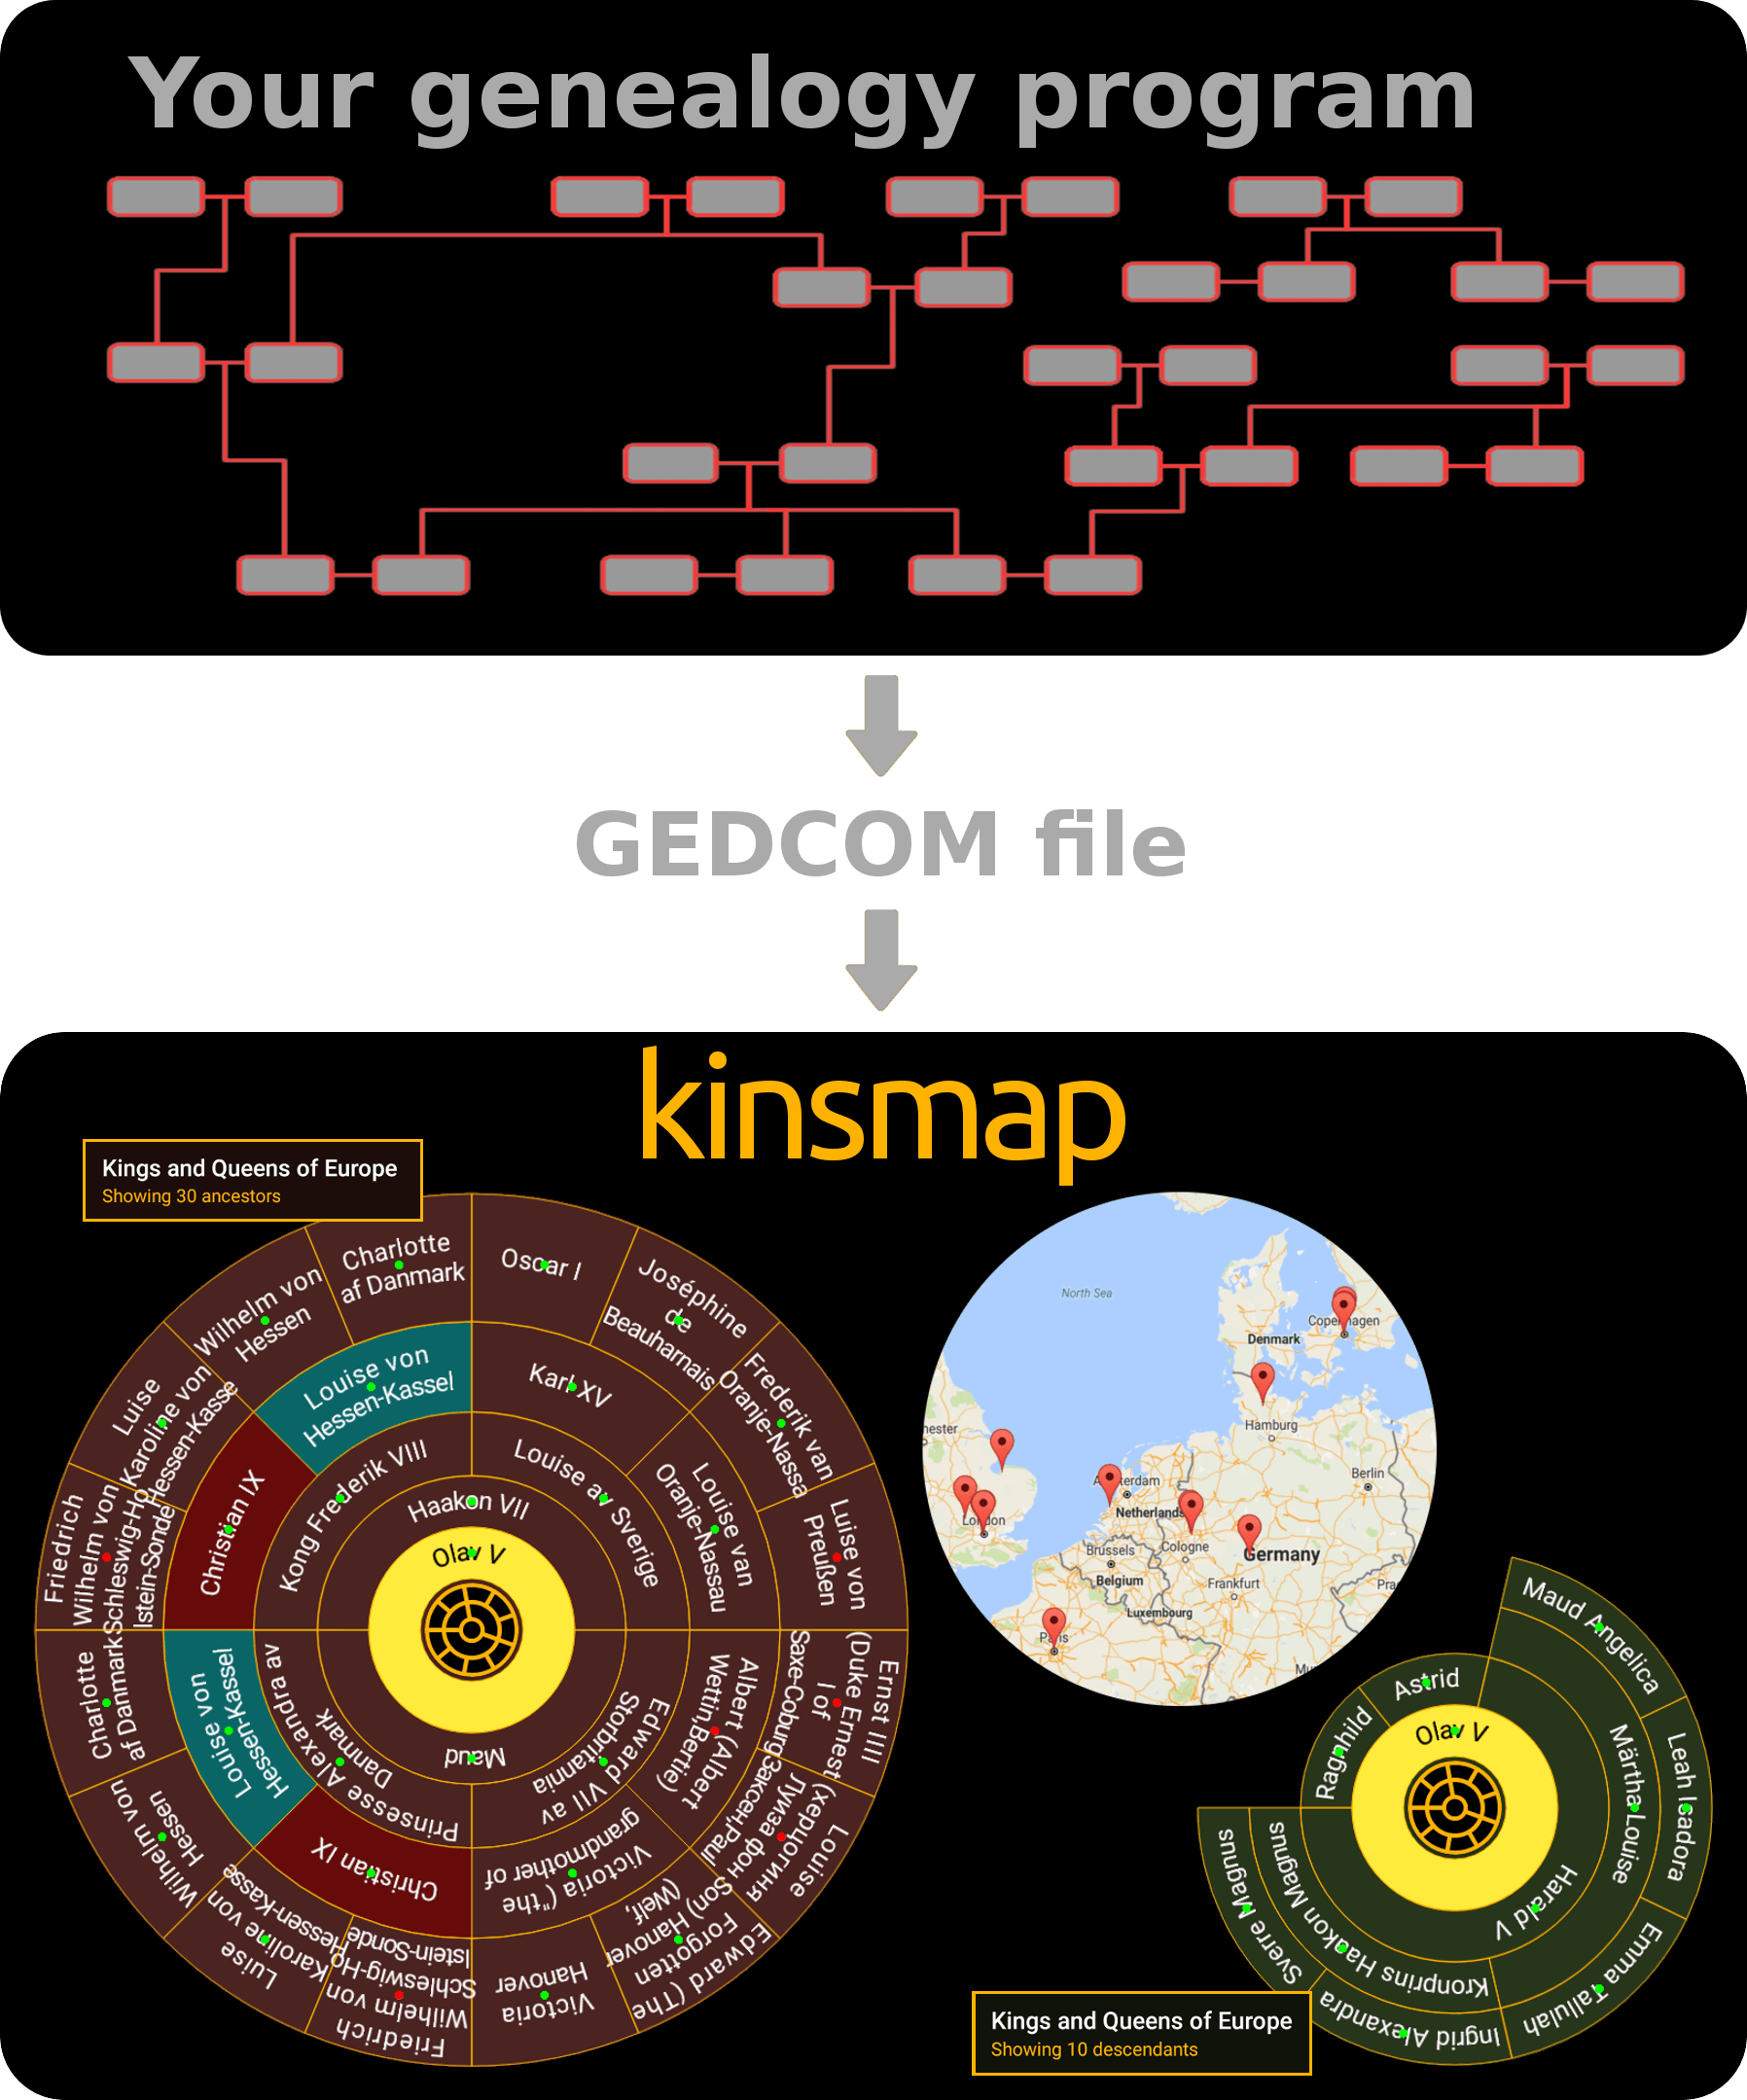 The Kinsmap attraction